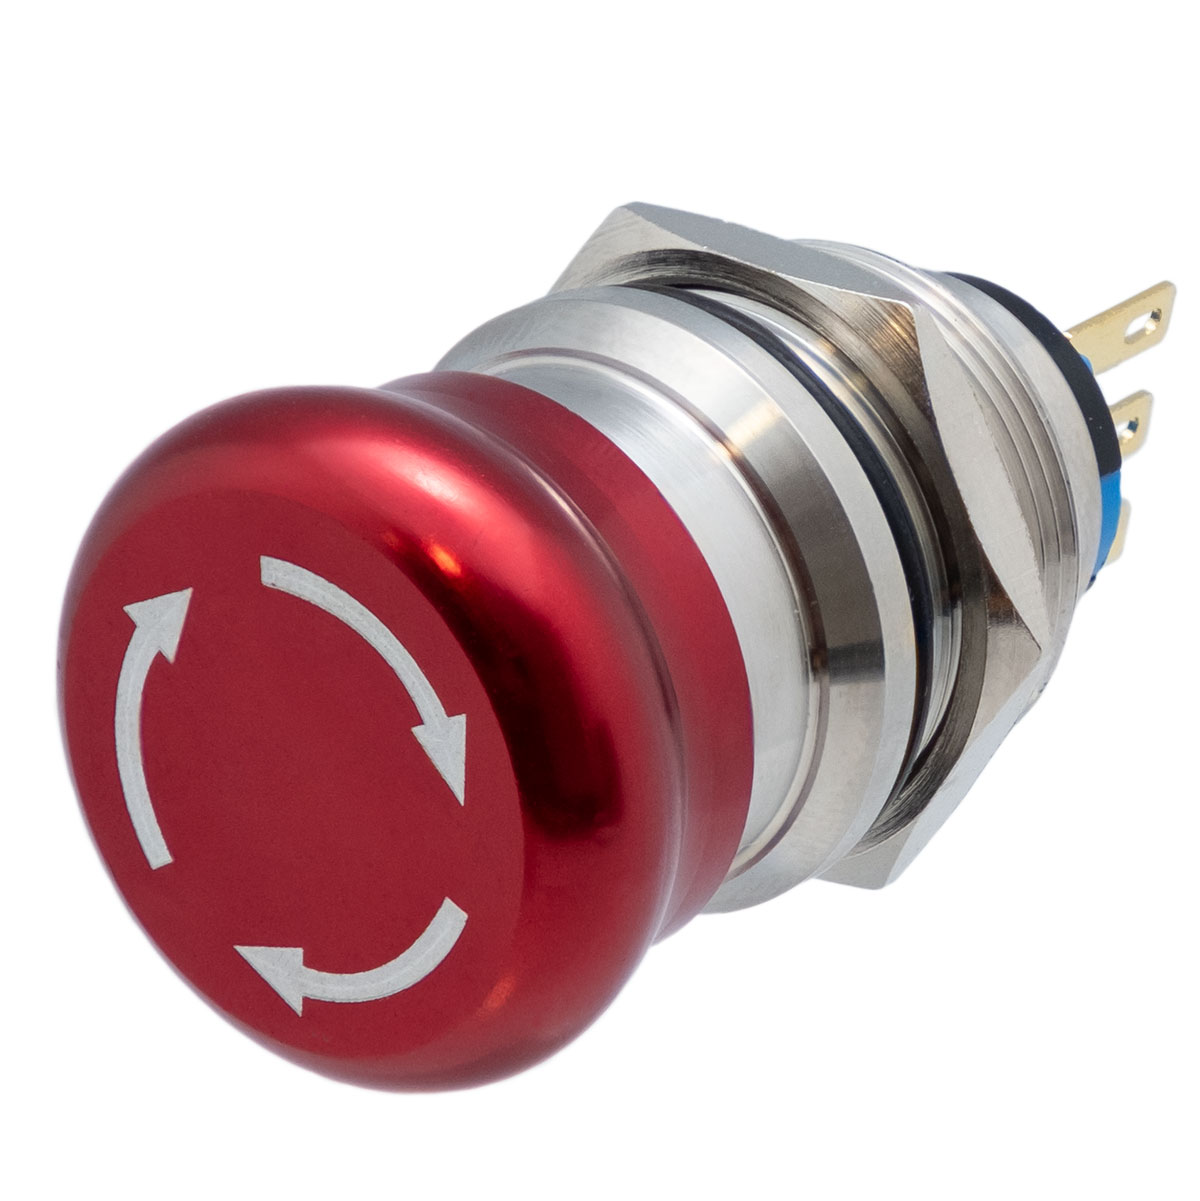 Emergency switch 28mm, stainless steel 22mm DPDT